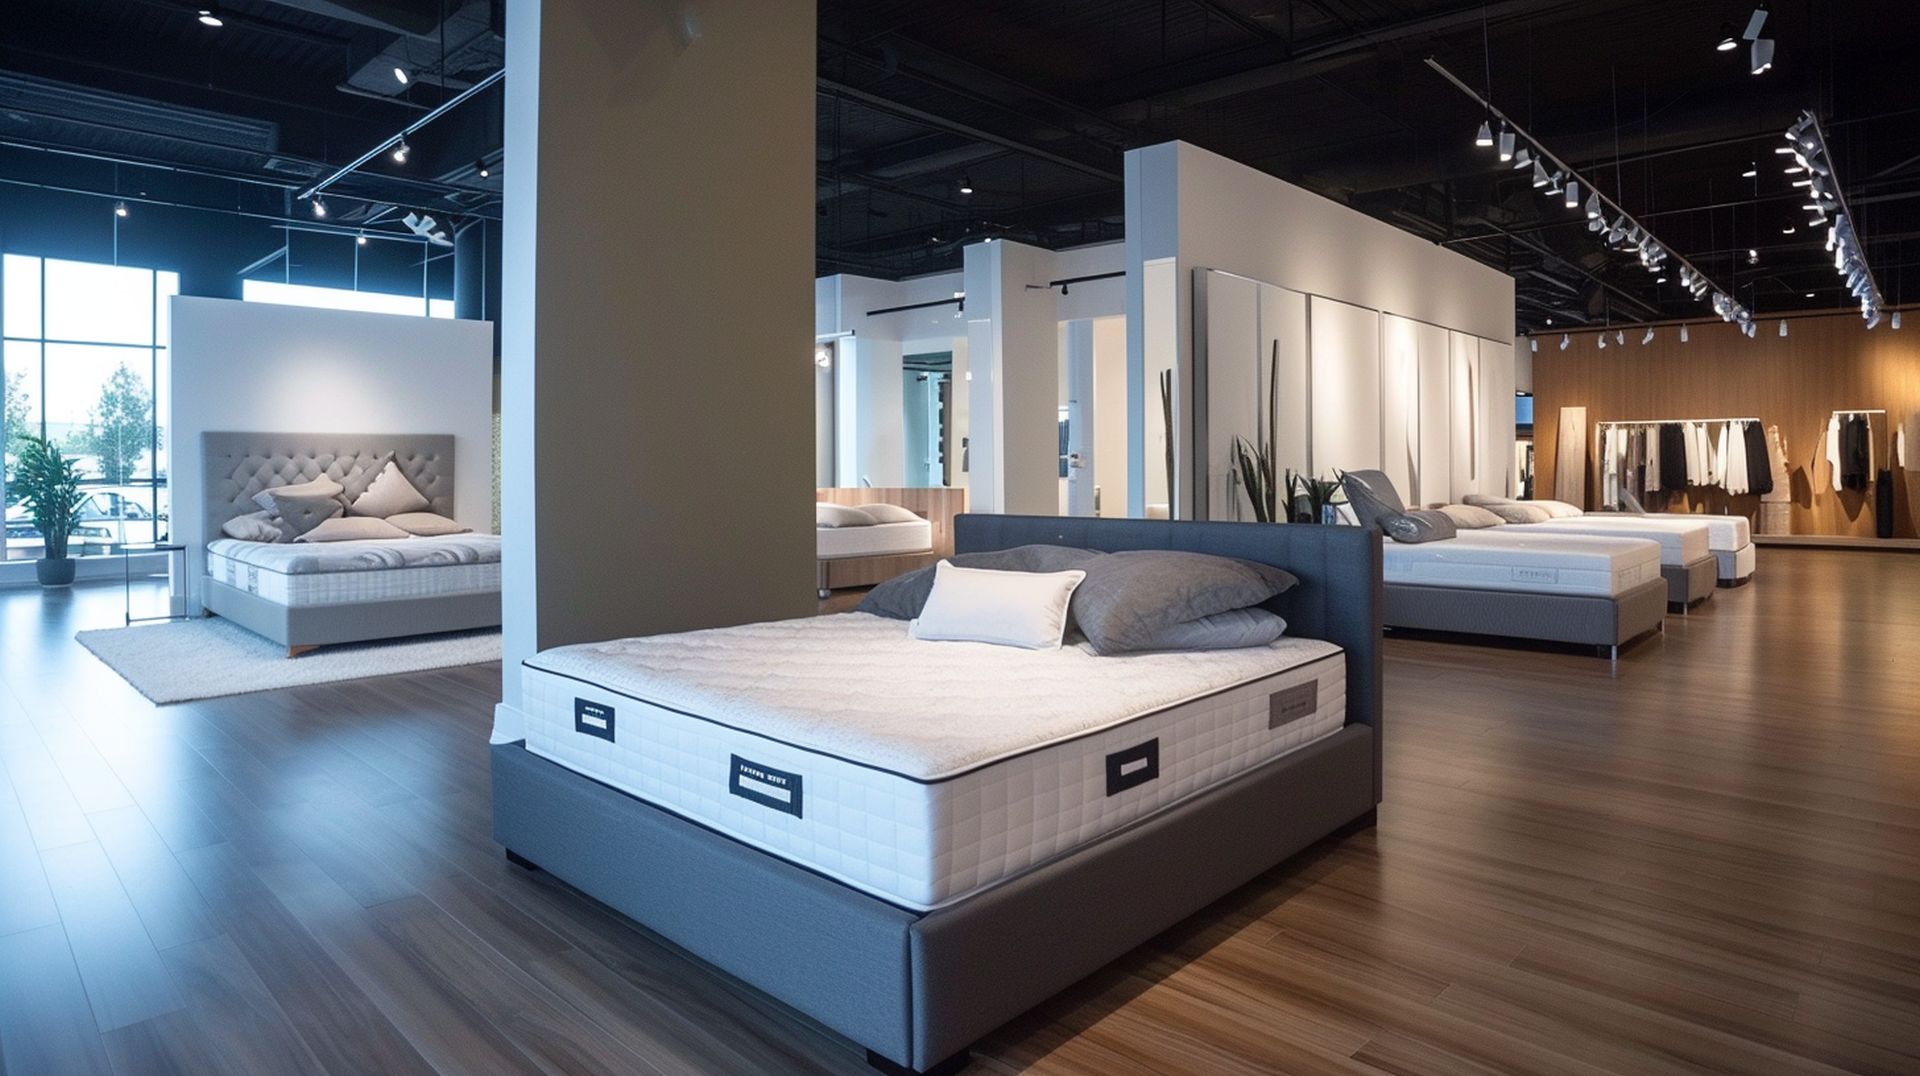 Types of mattresses at mattress dealers in Beaumont, TX